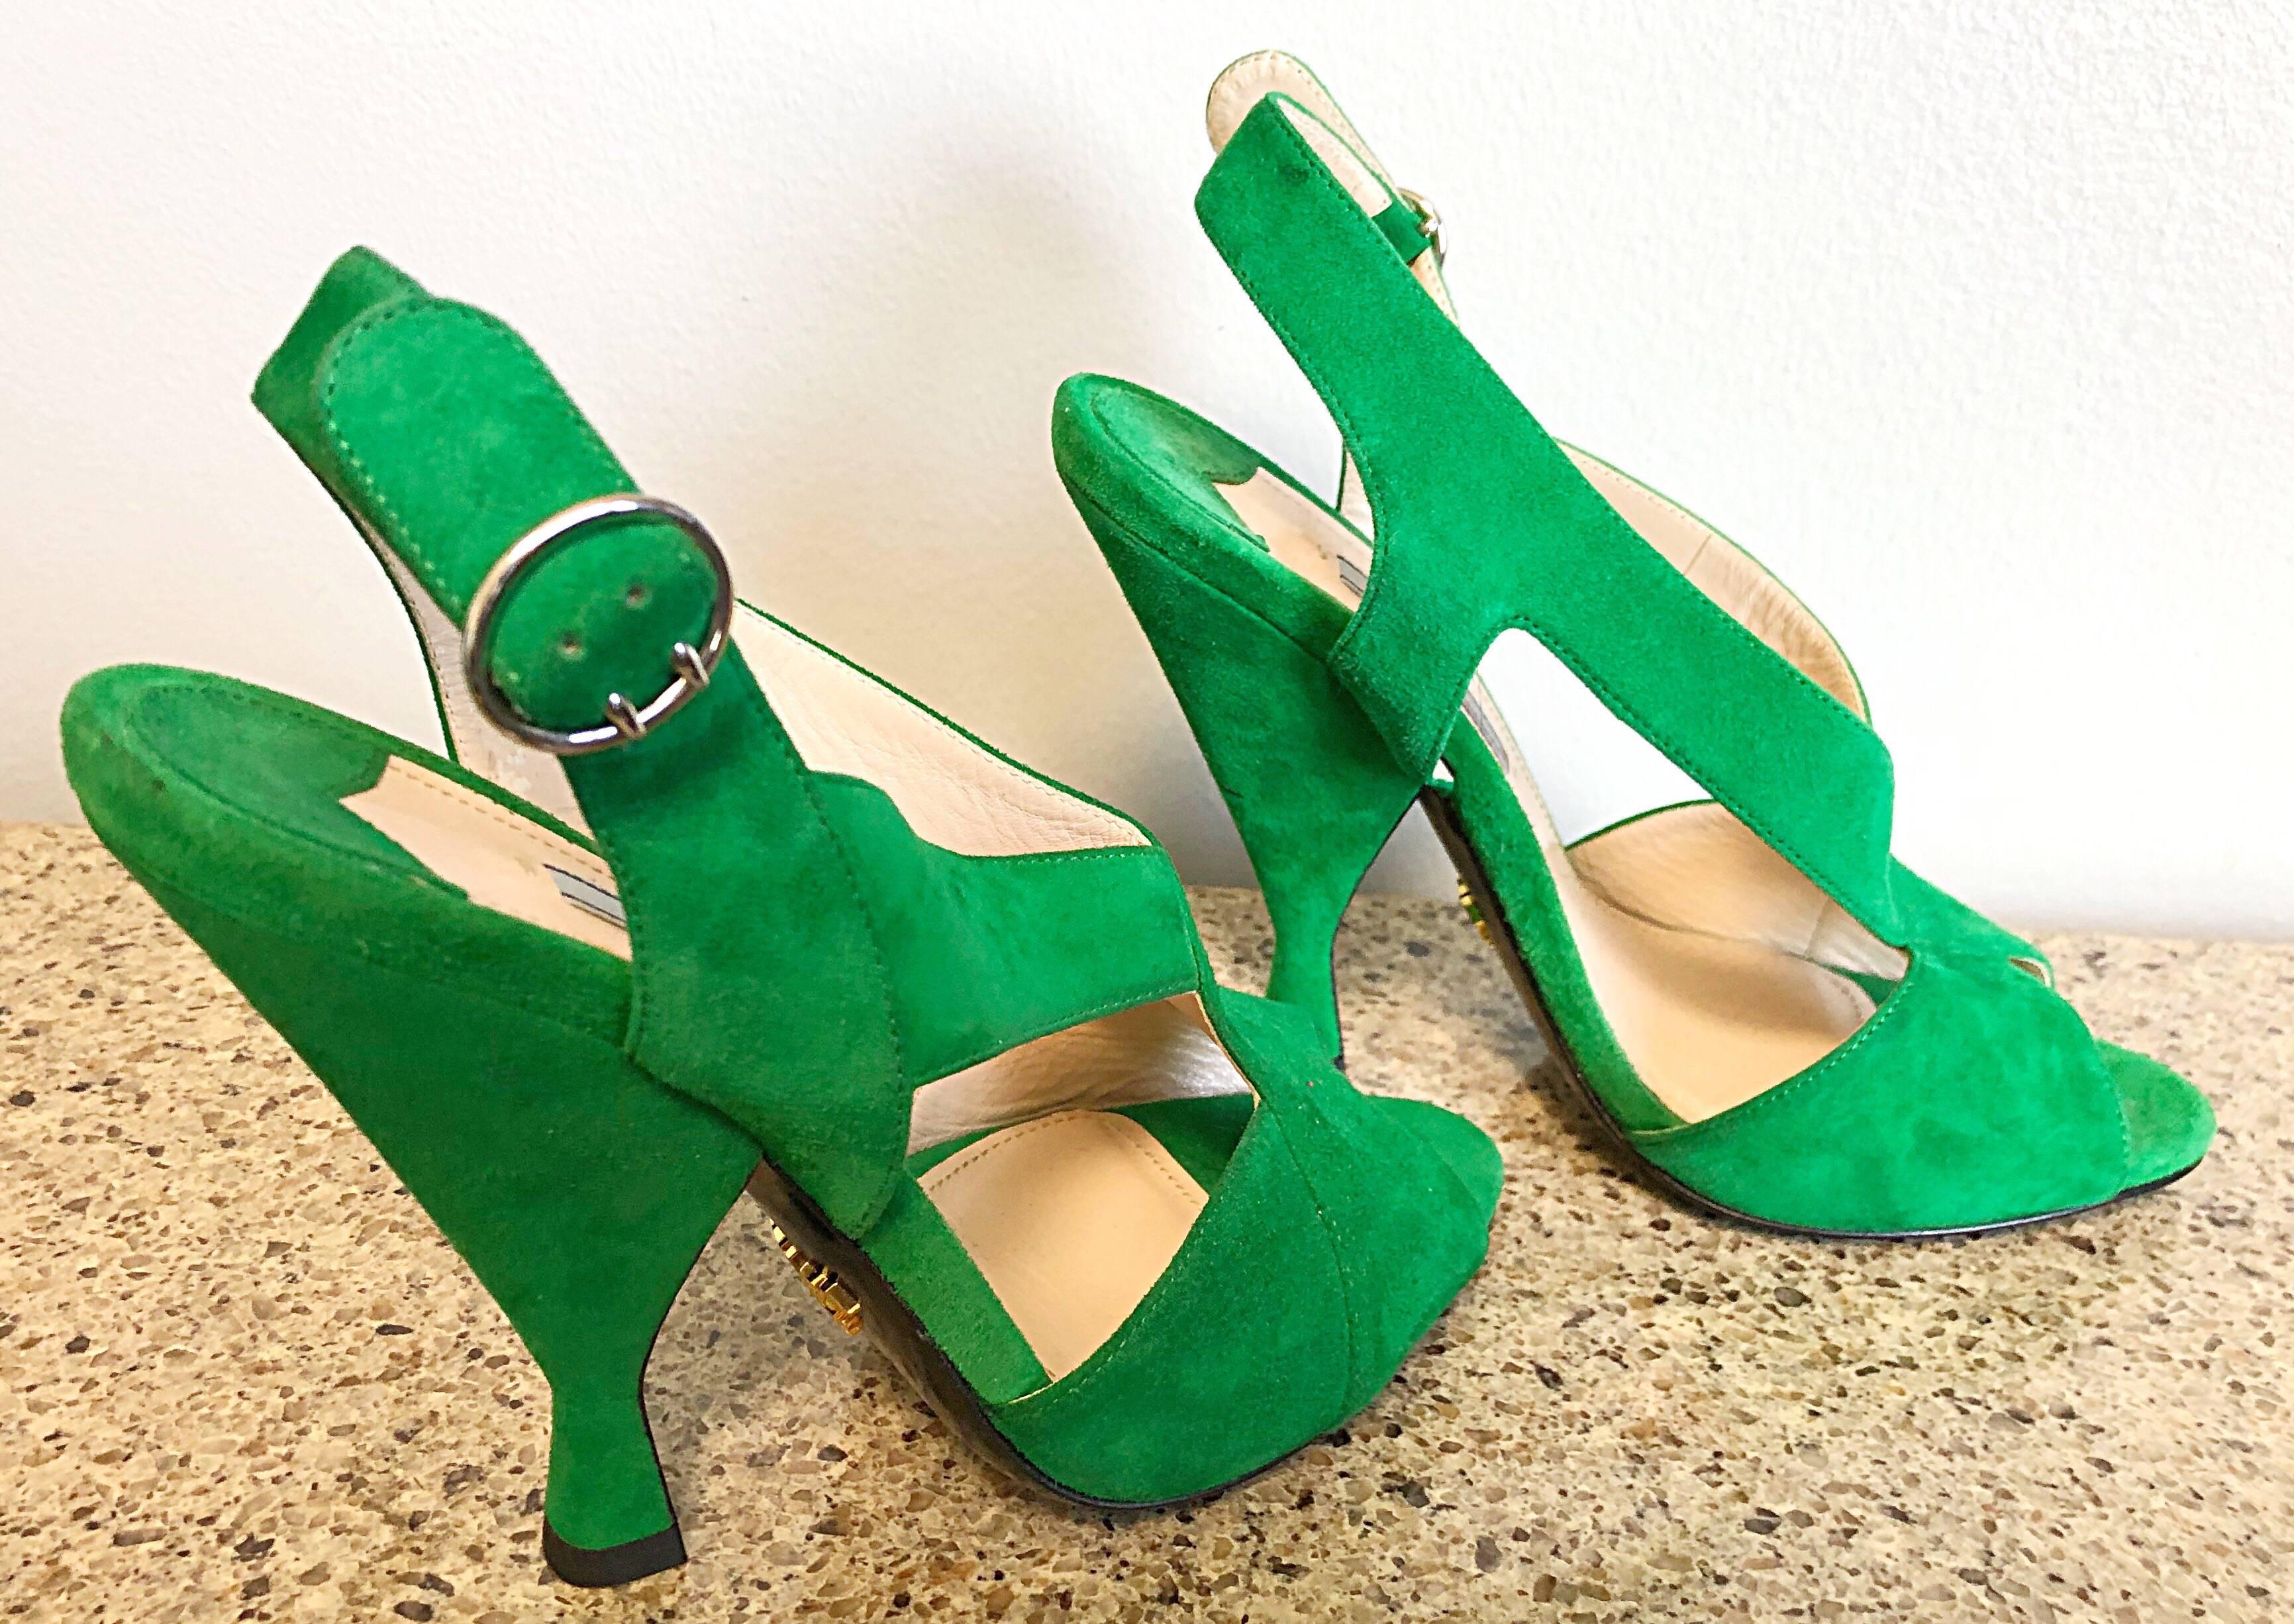 Women's New Prada Size 36.5 / 6.5 Runway Kelly Green Suede Sandal High Heels Shoes For Sale